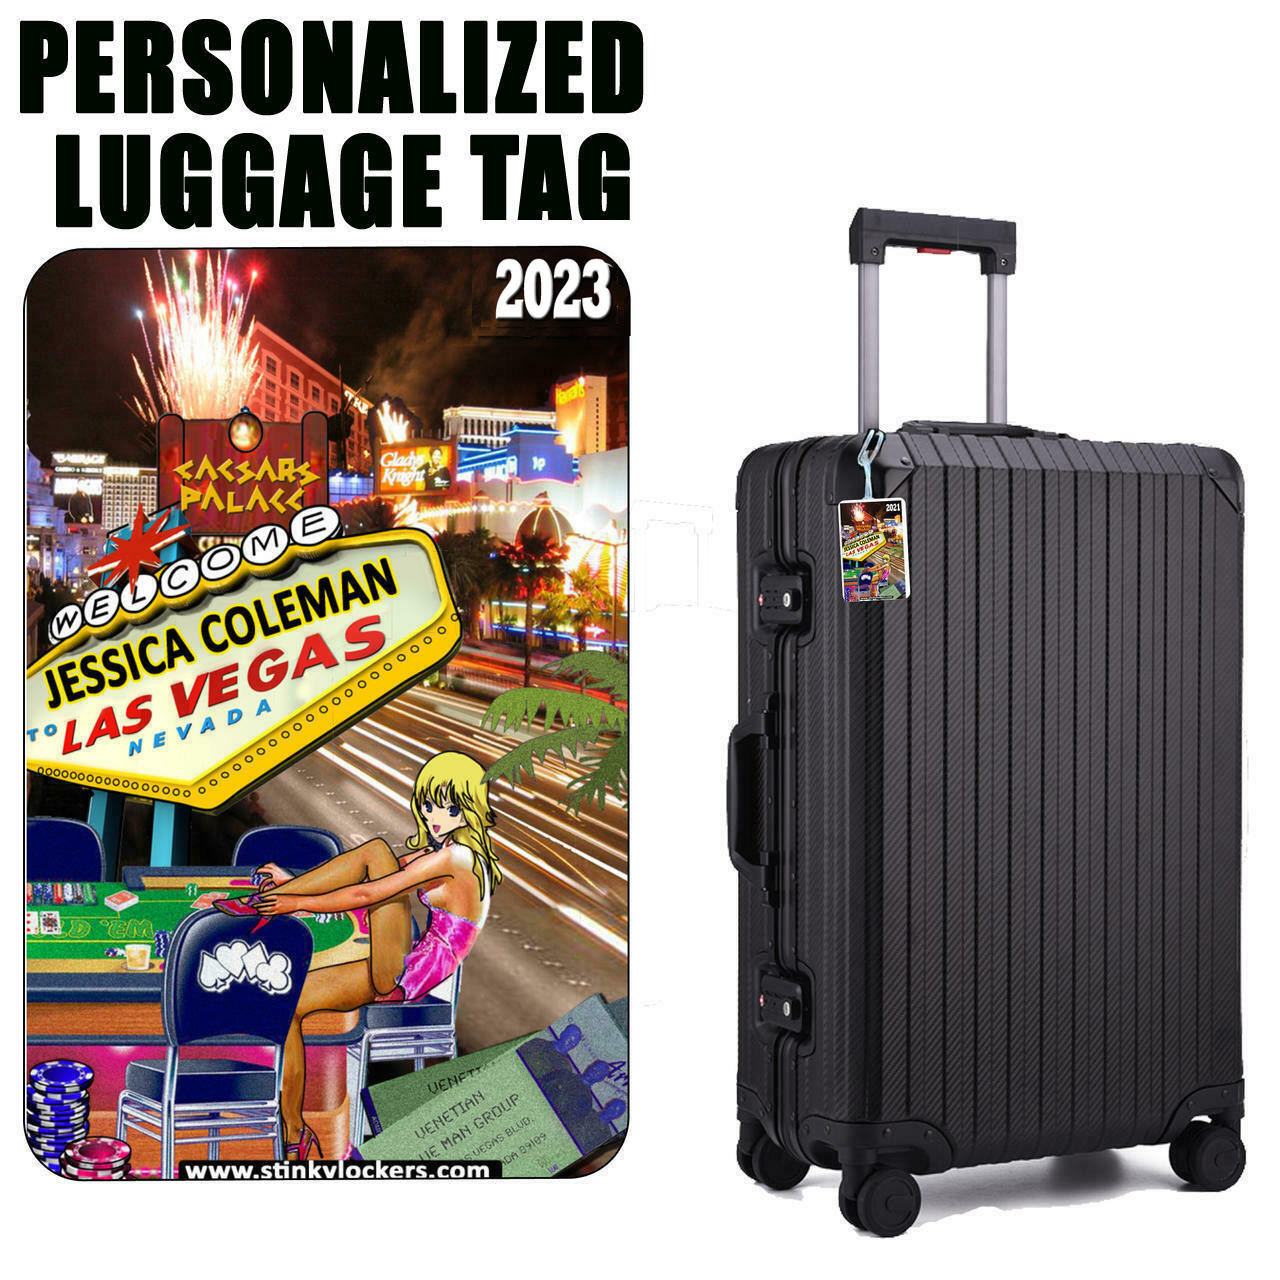 Stinky Lockers Personalized Las Vegas Luggage Tag with Loop 